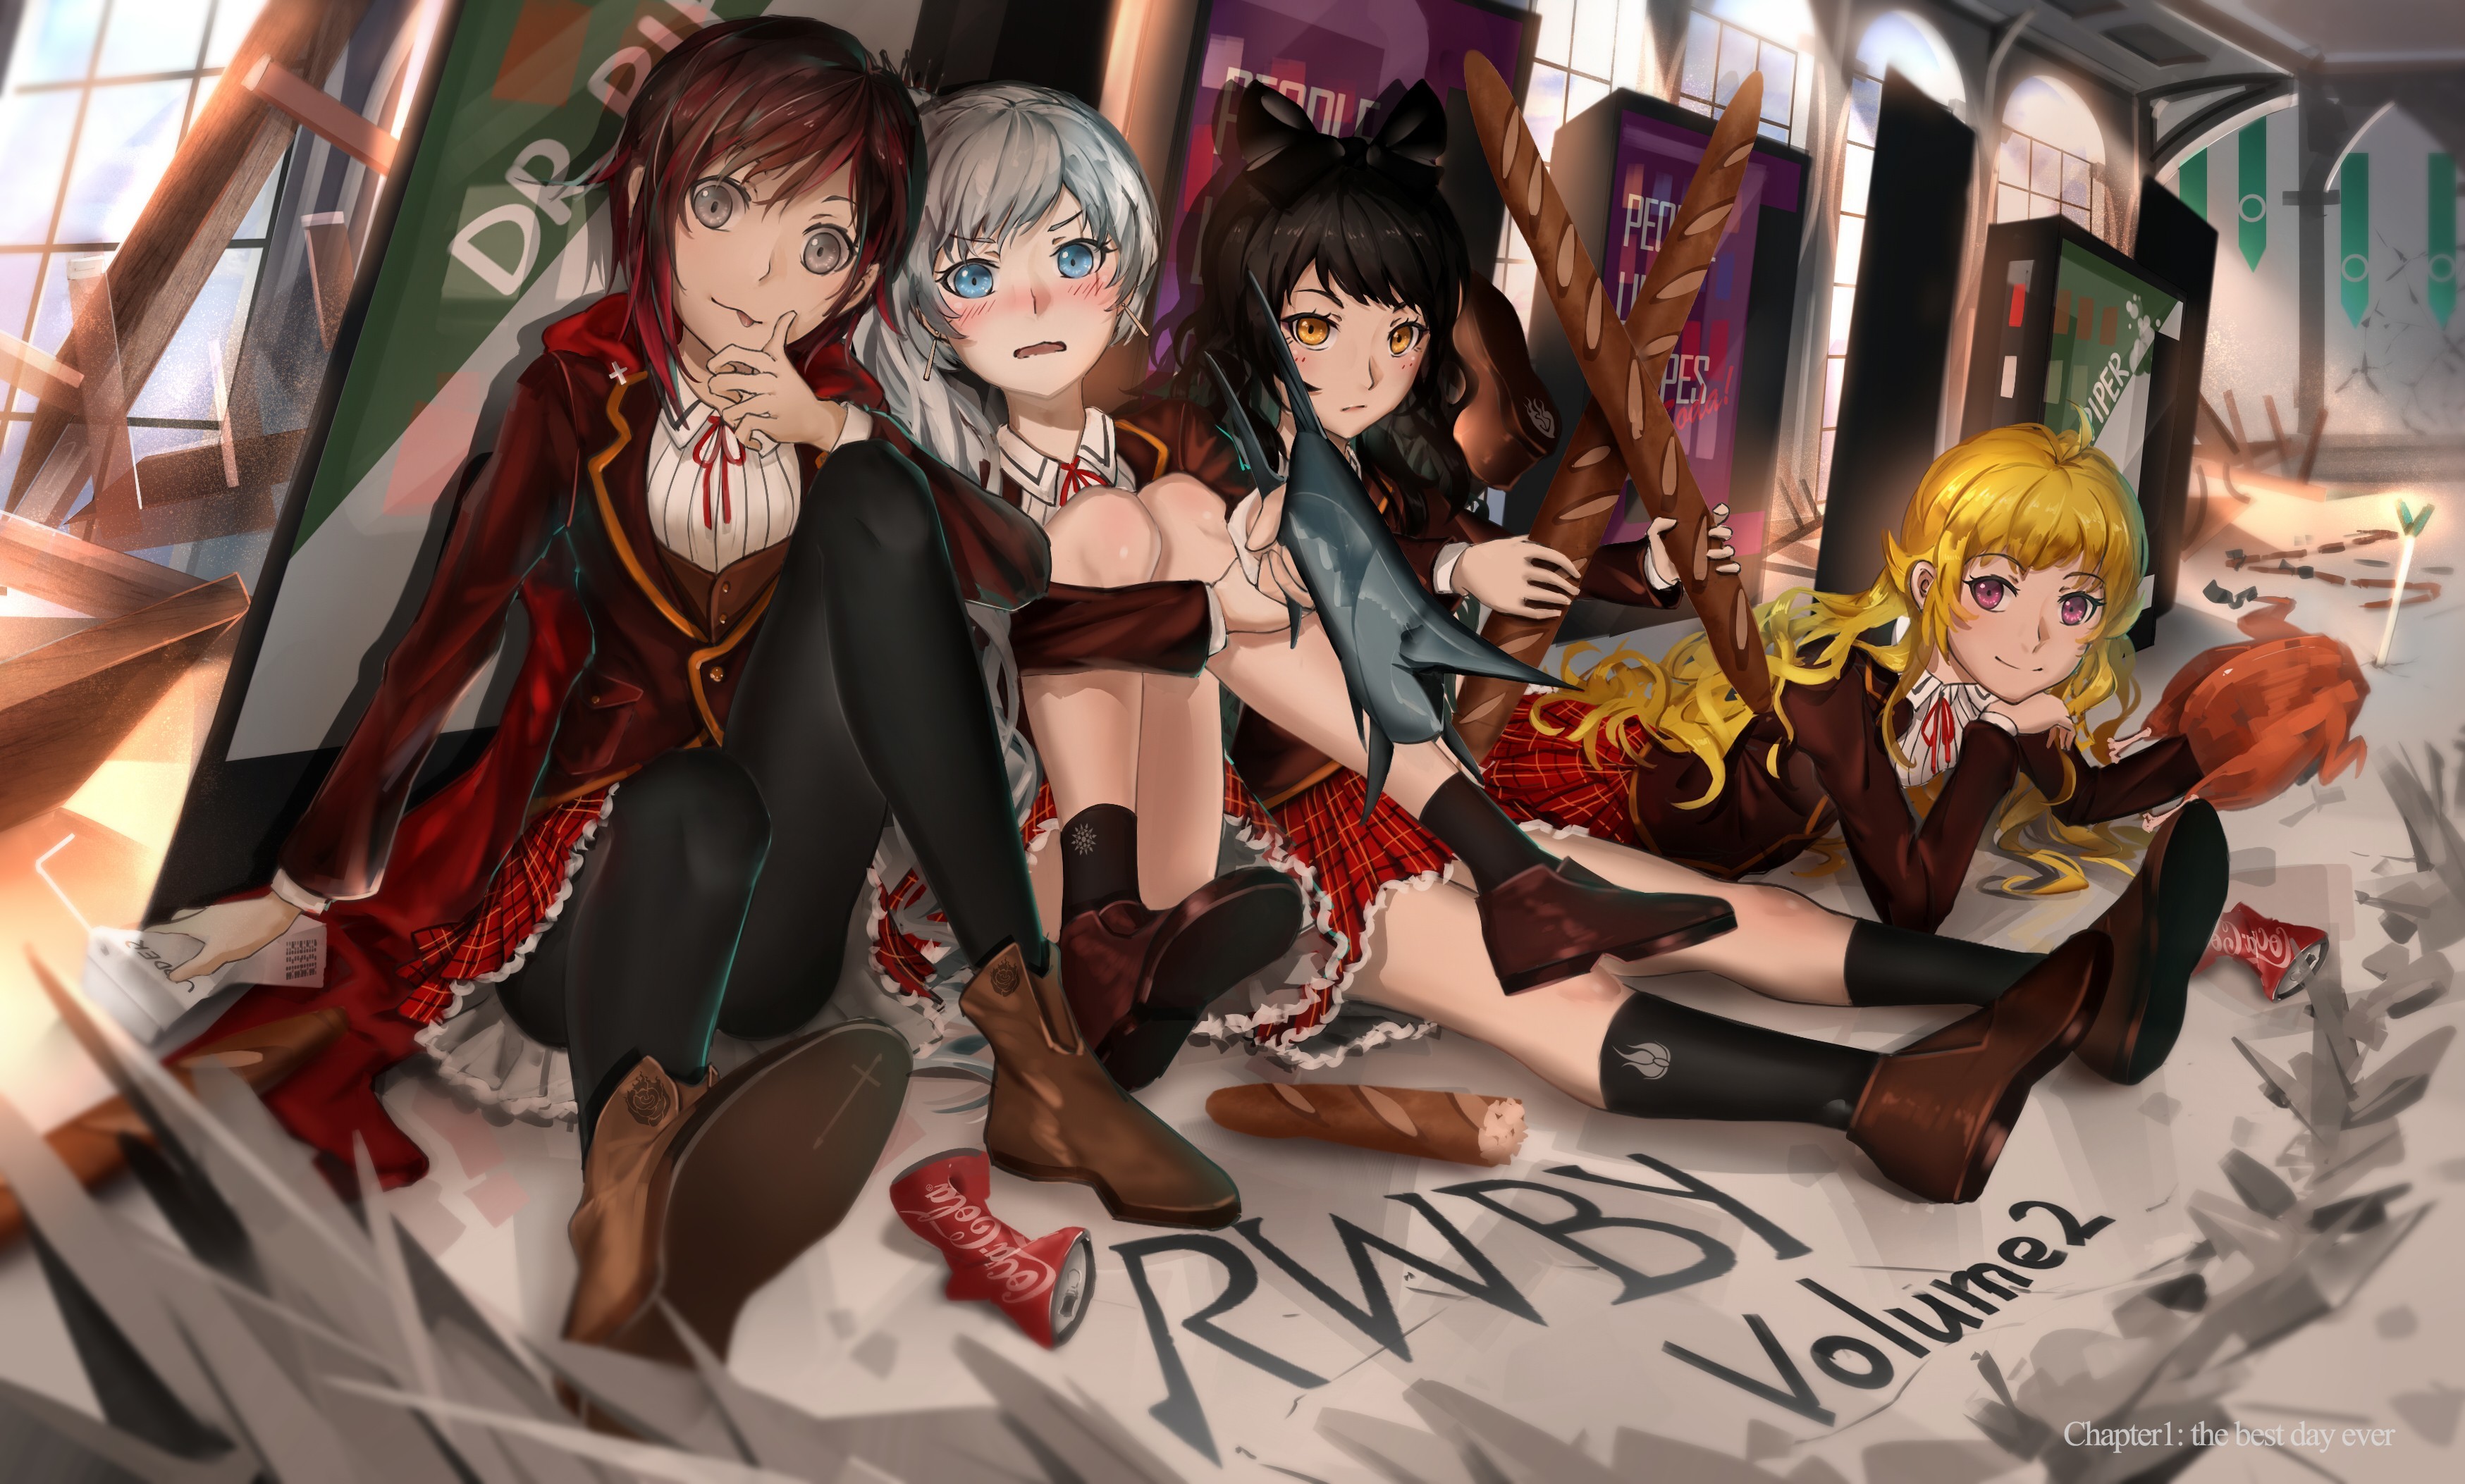 Anime Rooster Teeth RWBY Ruby Rose (character) Weiss Schnee Blake  Belladonna Yang Xiao